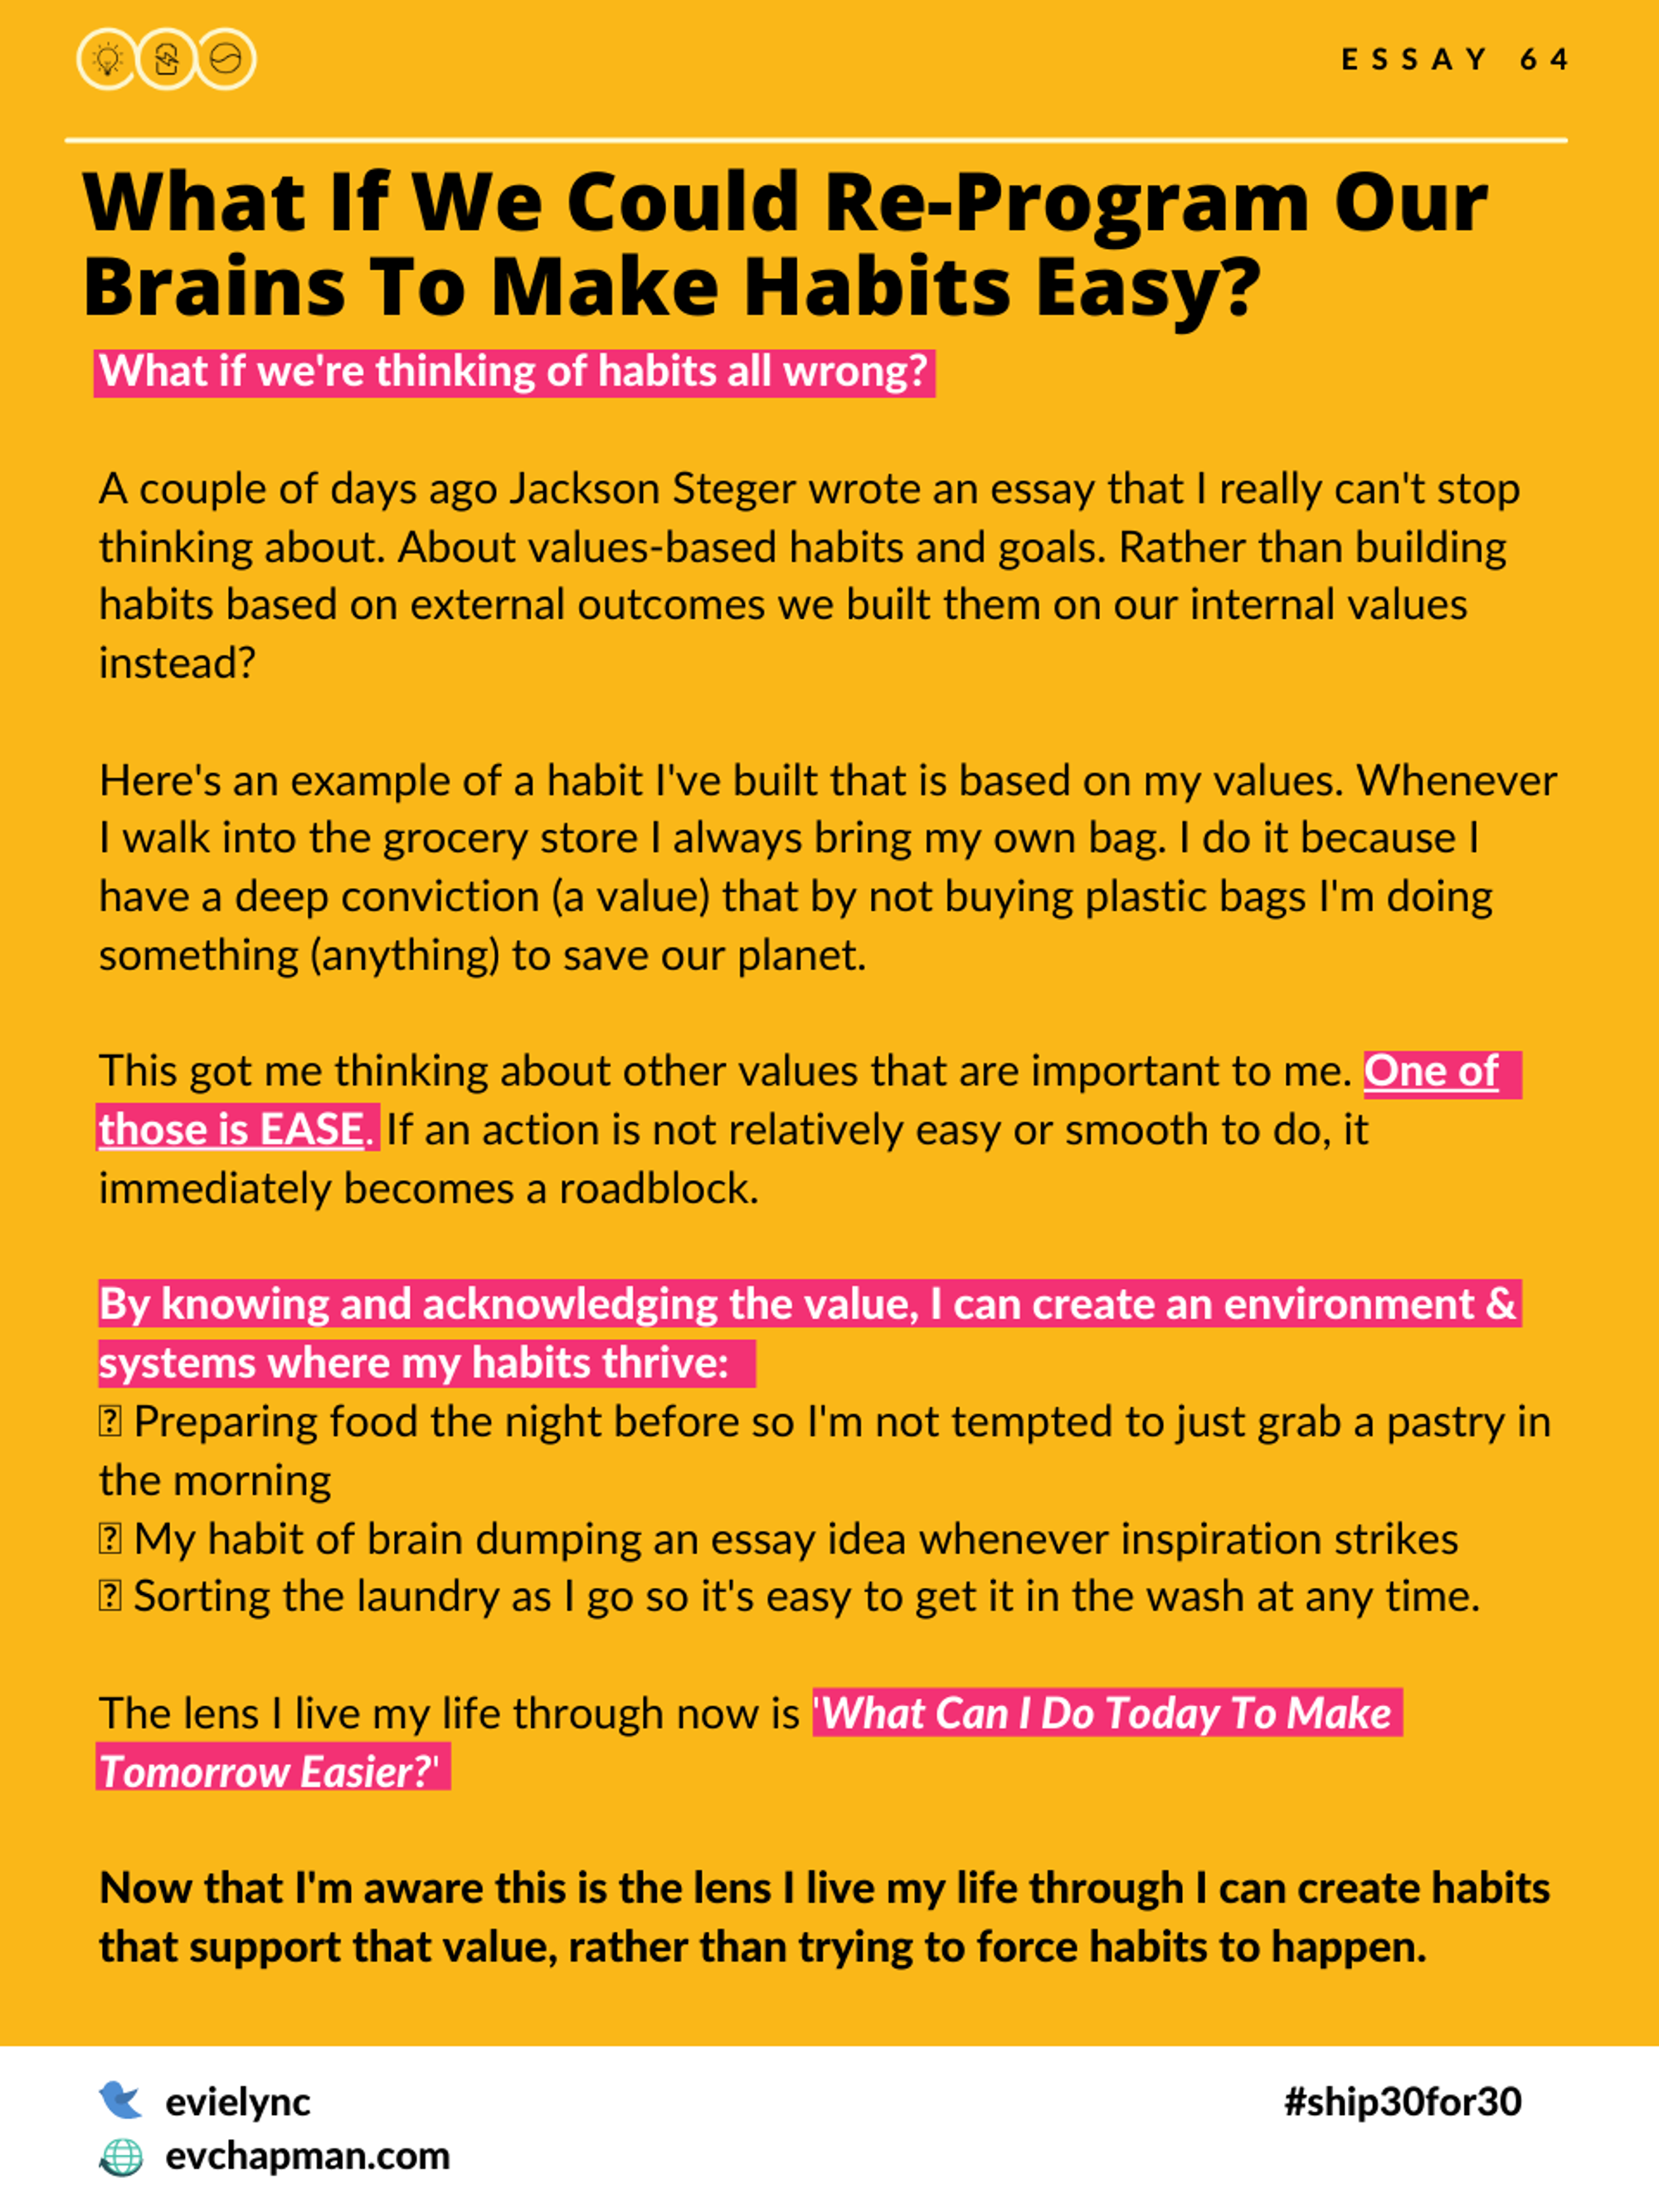 What If We Could Re-Program Our Brains To Make Habits Easy?